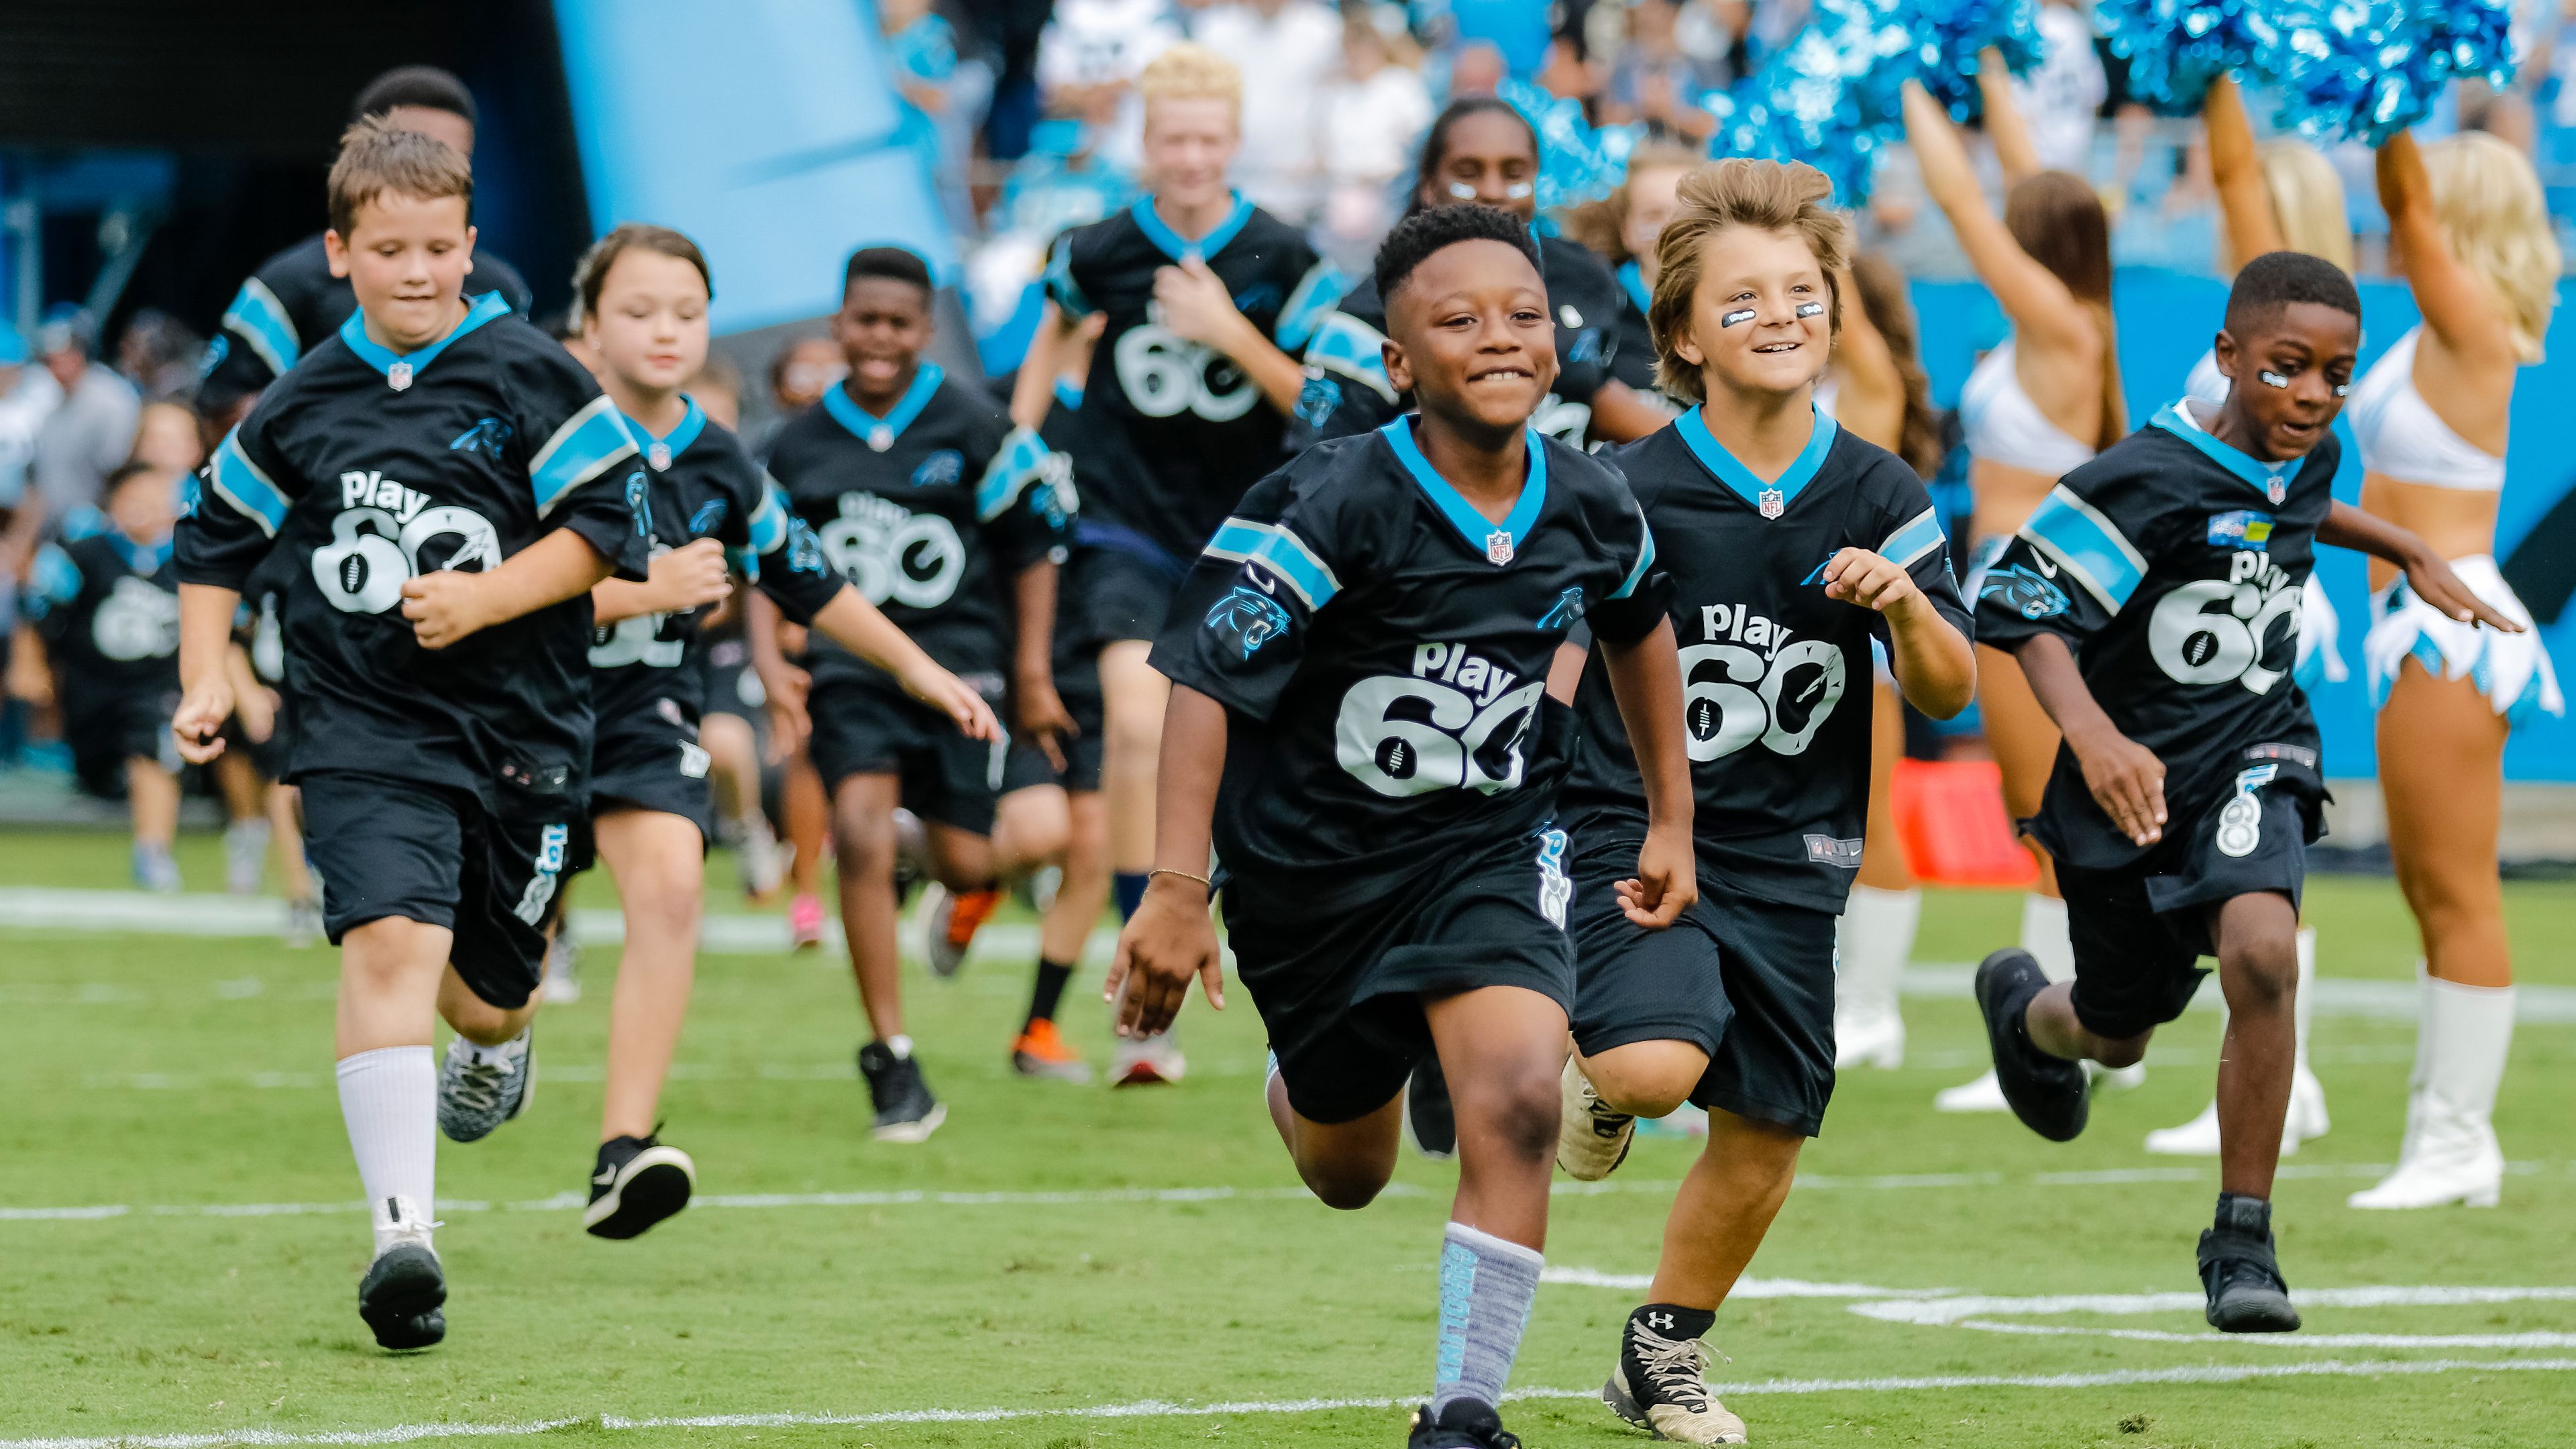 NFL & Good Sports Partner For Youth Donation